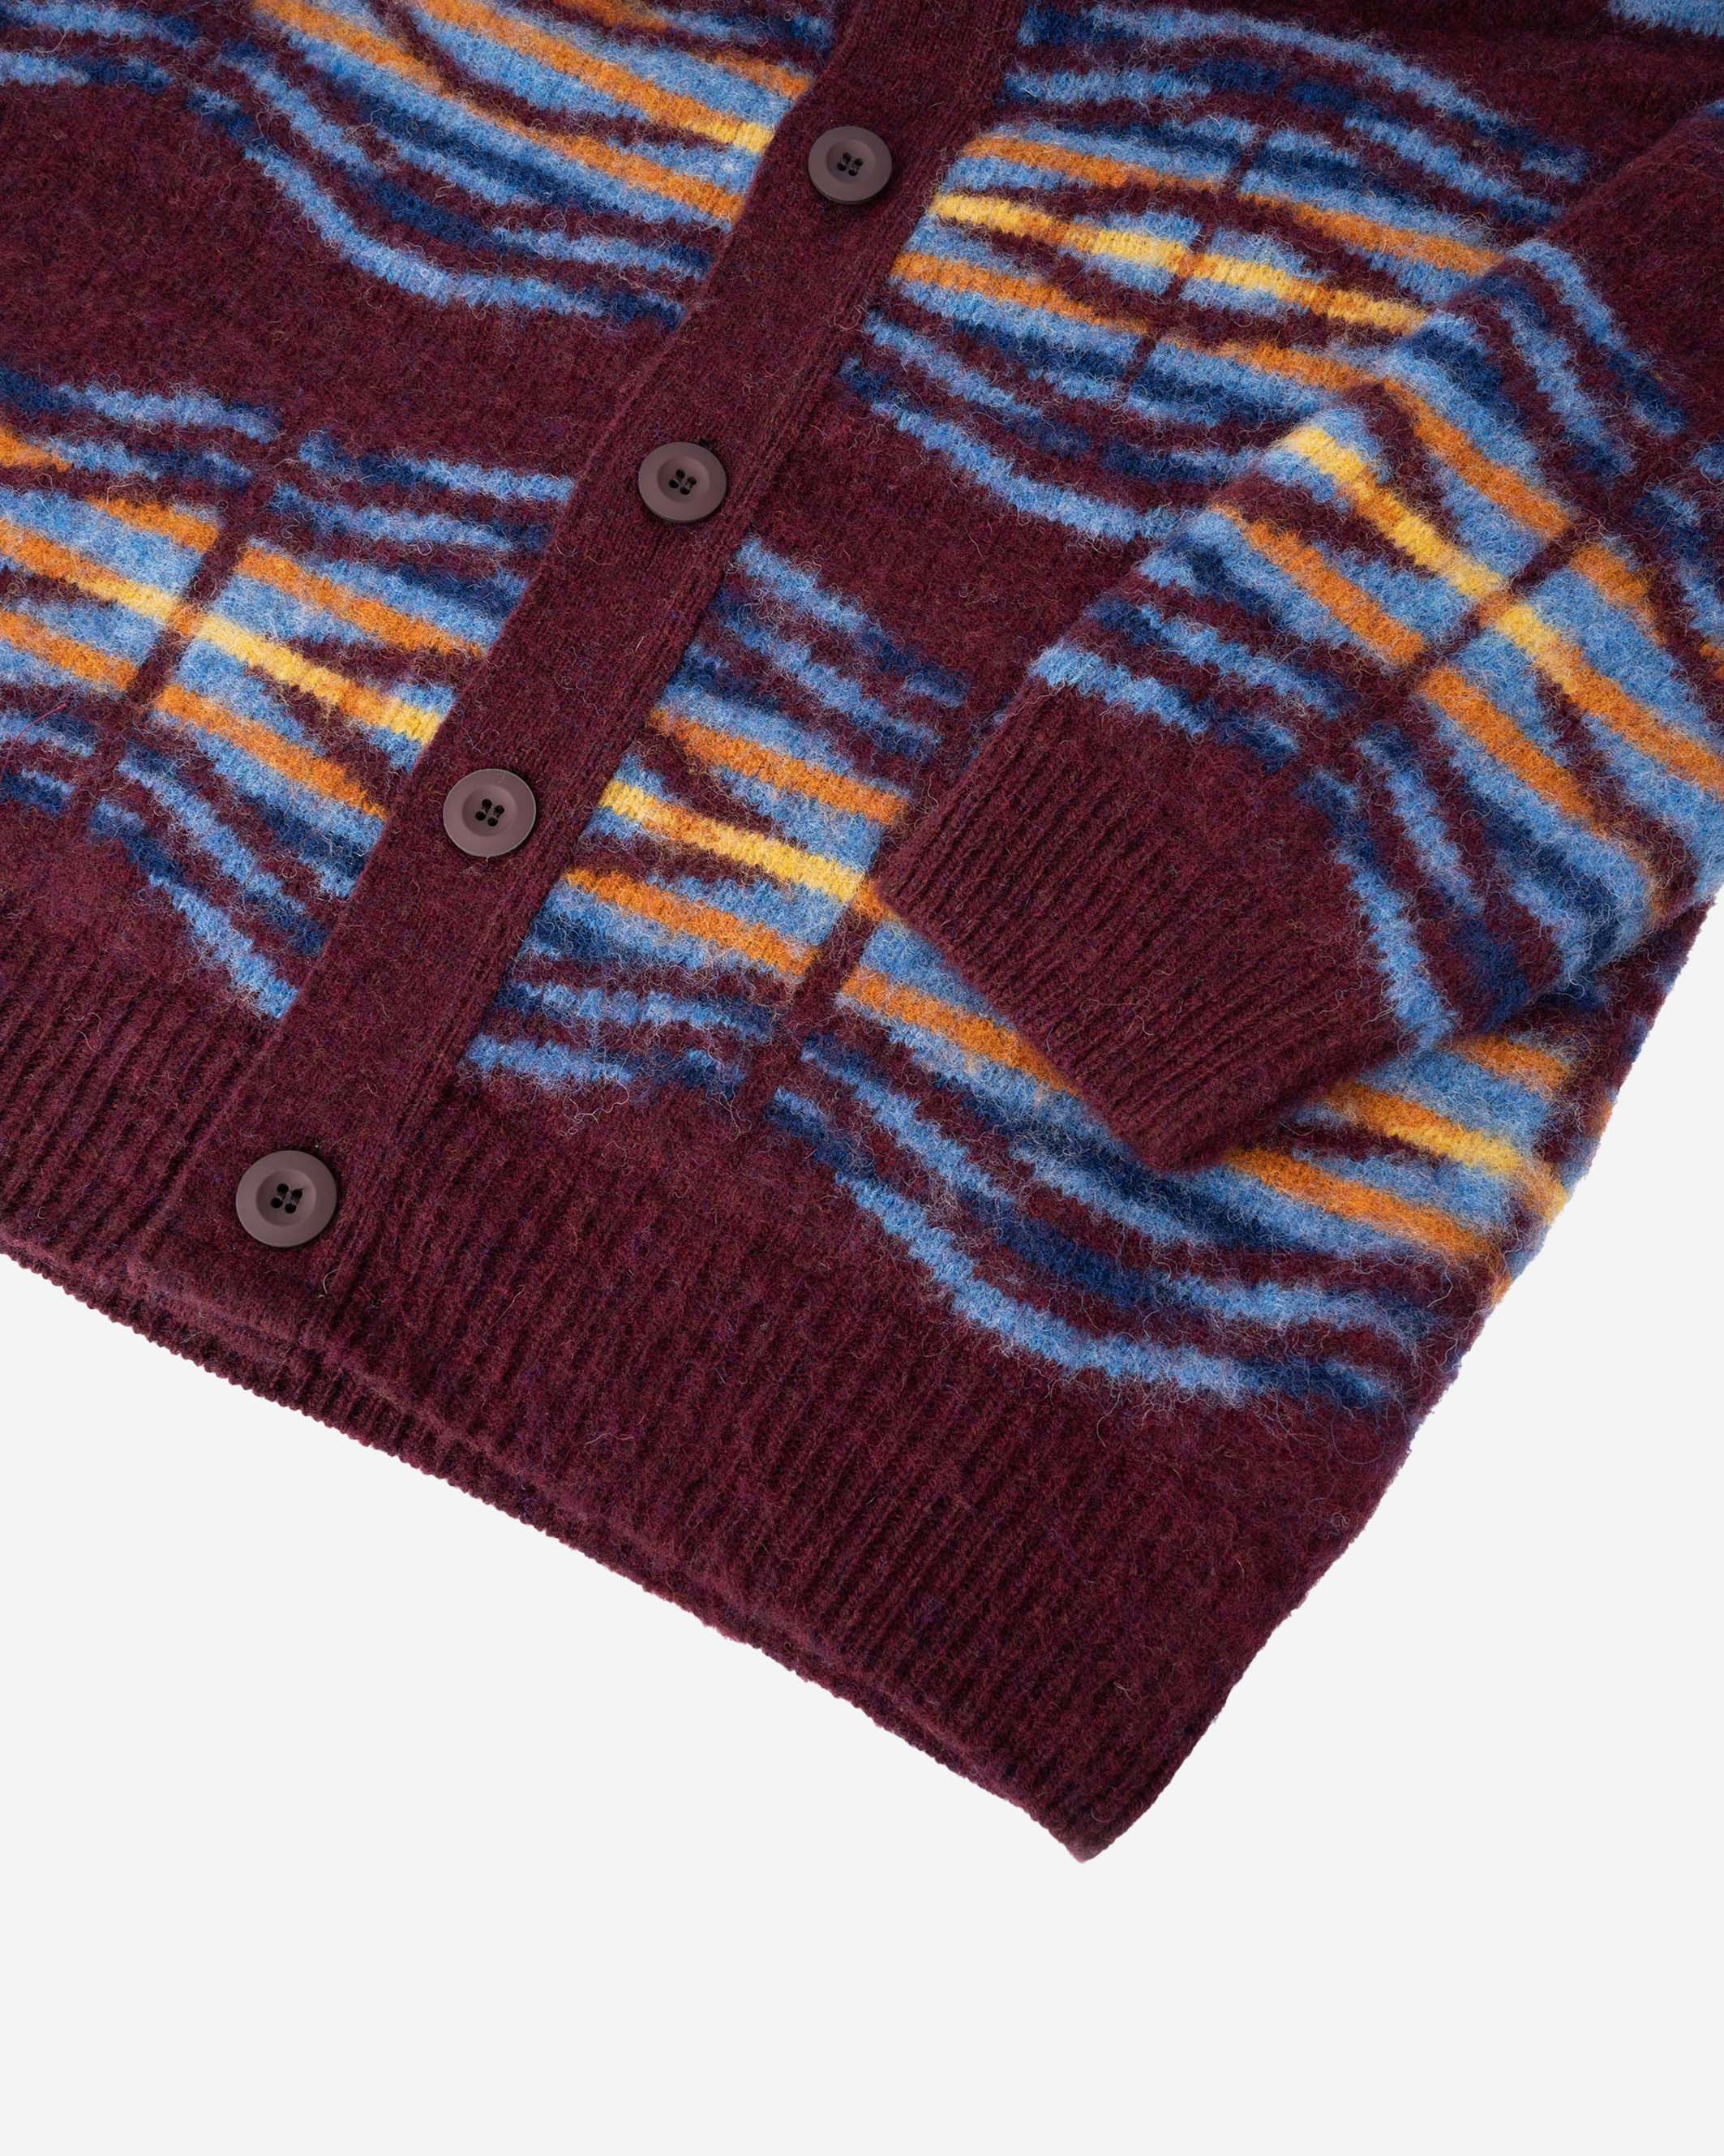 Out Of This World is a new seasonal highlight of Howlin's winter collection. Made out of 100% local Scottish wool. Fully knitted and hand finished in Scotland. Fits regularly.